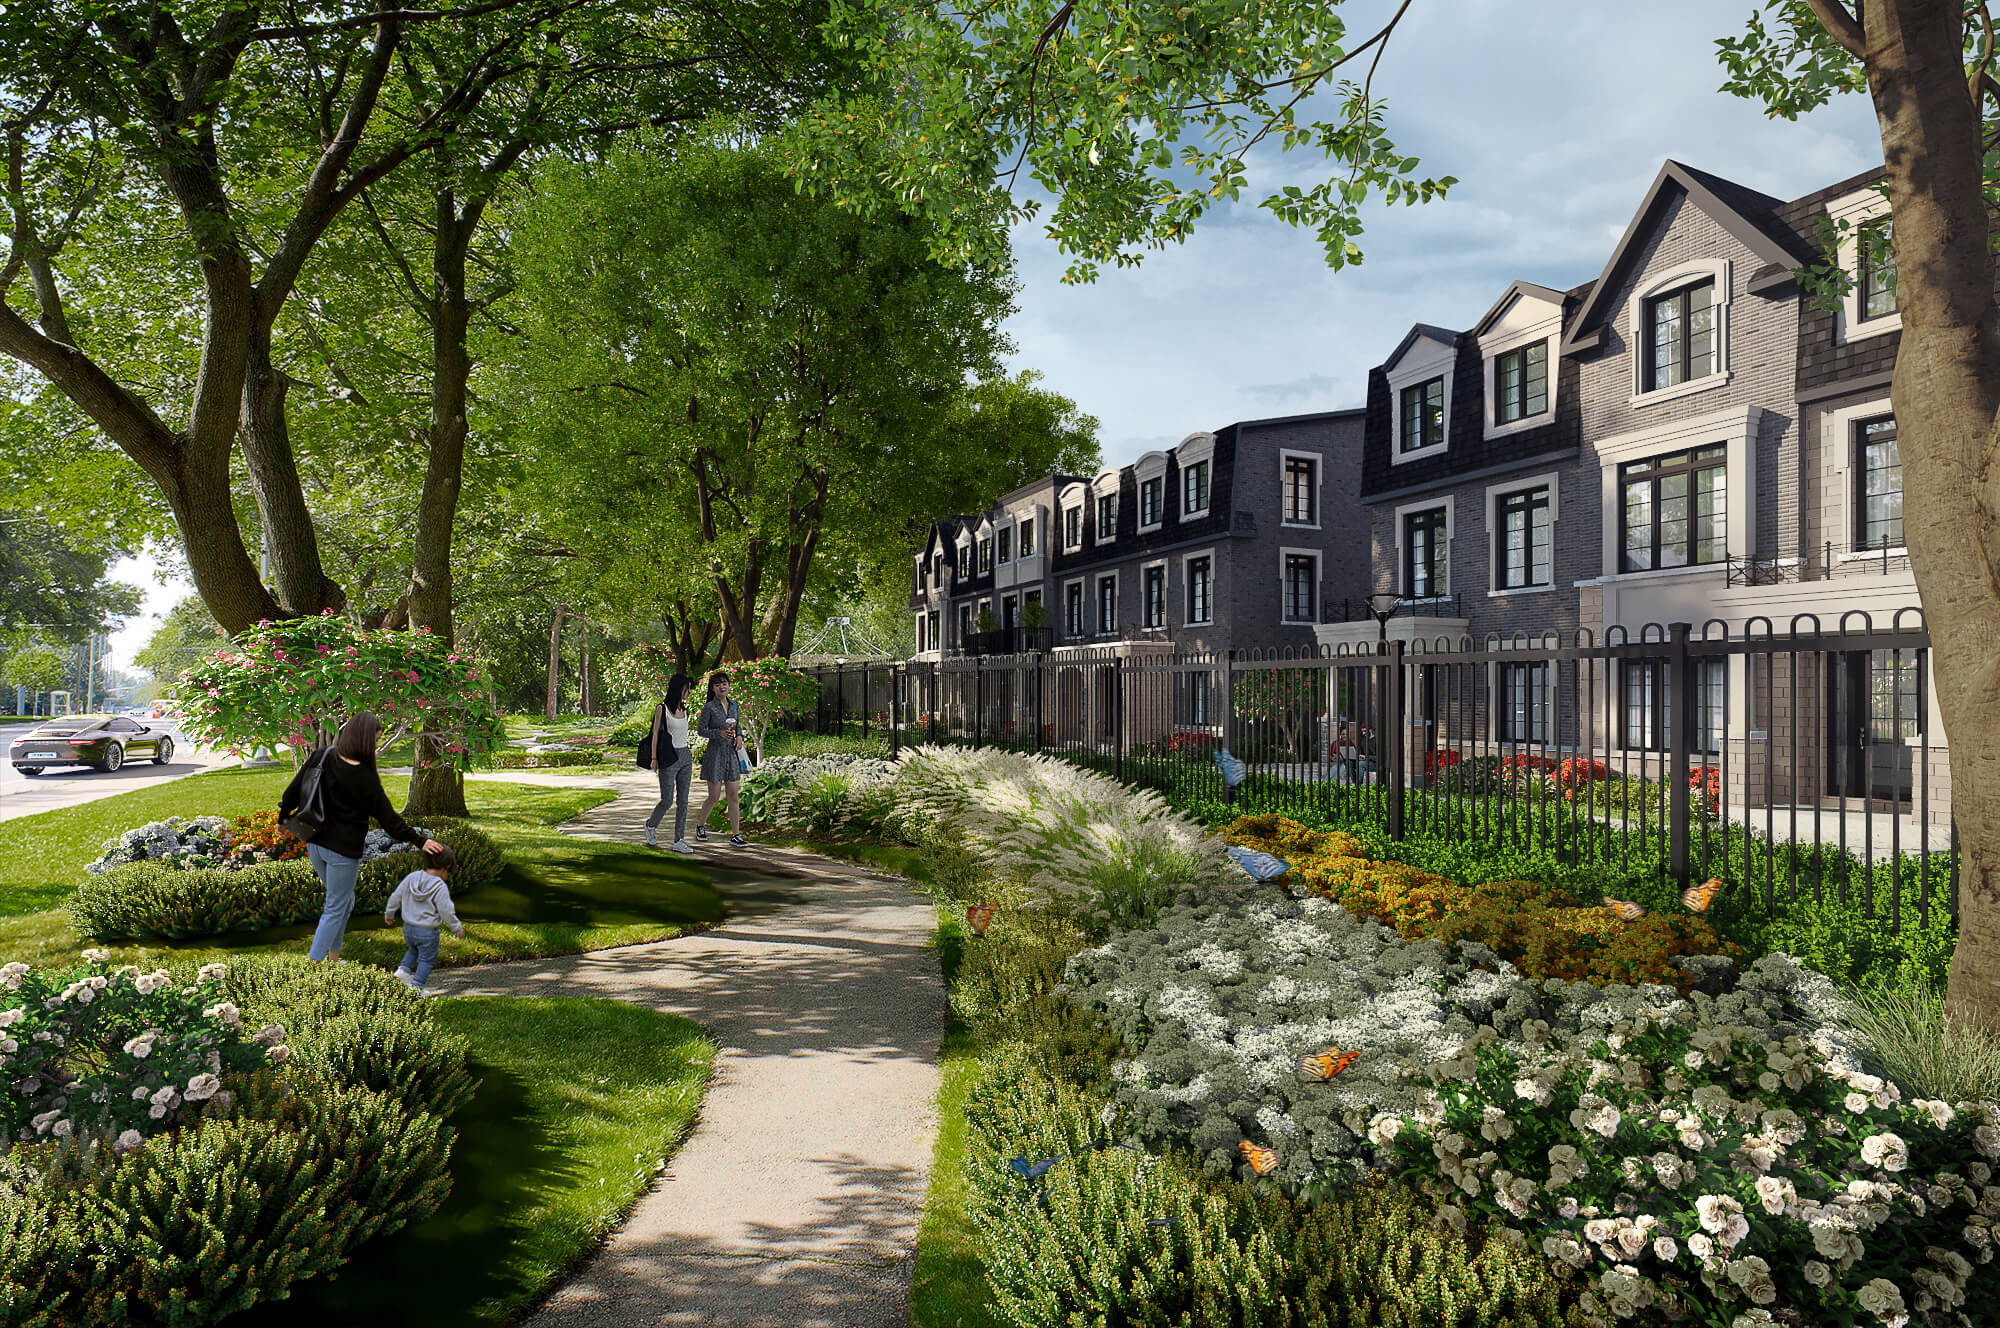 Summer rendering of the Flora community forecourt, featuring a path winding through lush flowerbeds with Flora’s gate and townhomes in the background.